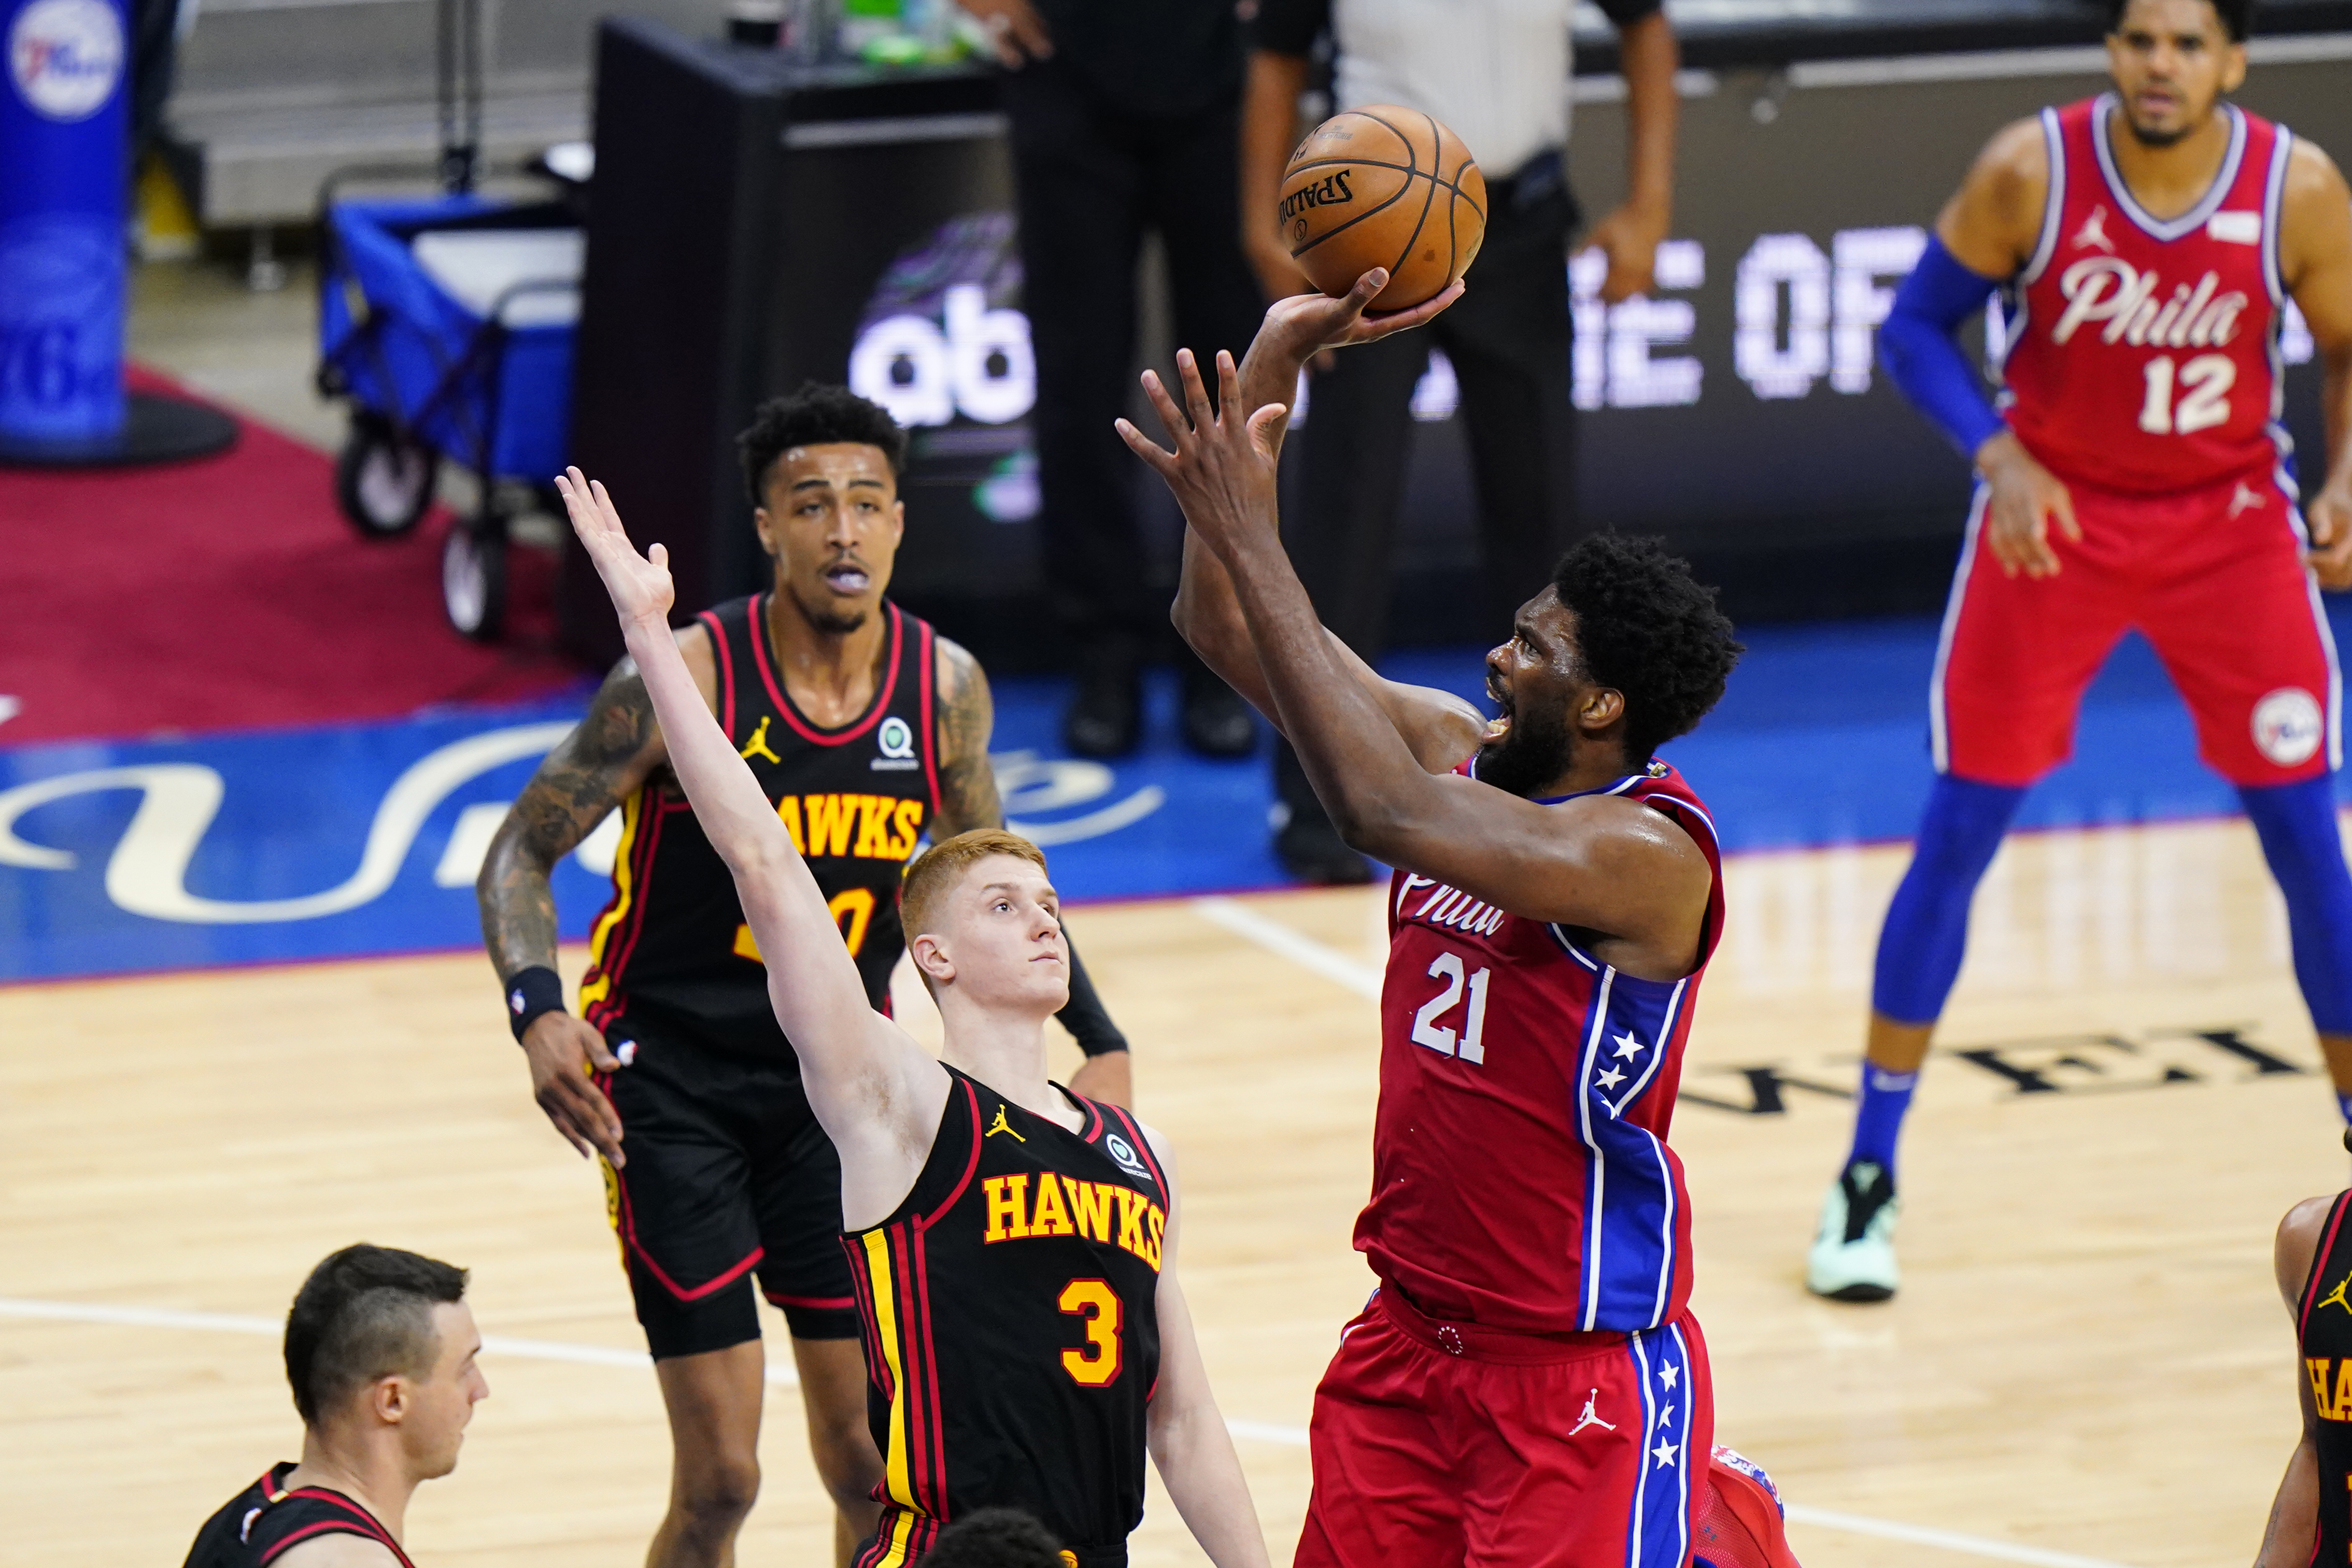 Philadelphia 76ers 118, Atlanta Hawks 102 - Final Free live stream, Game 2 odds, time, TV channel, how to watch NBA playoffs online (6/8/21)